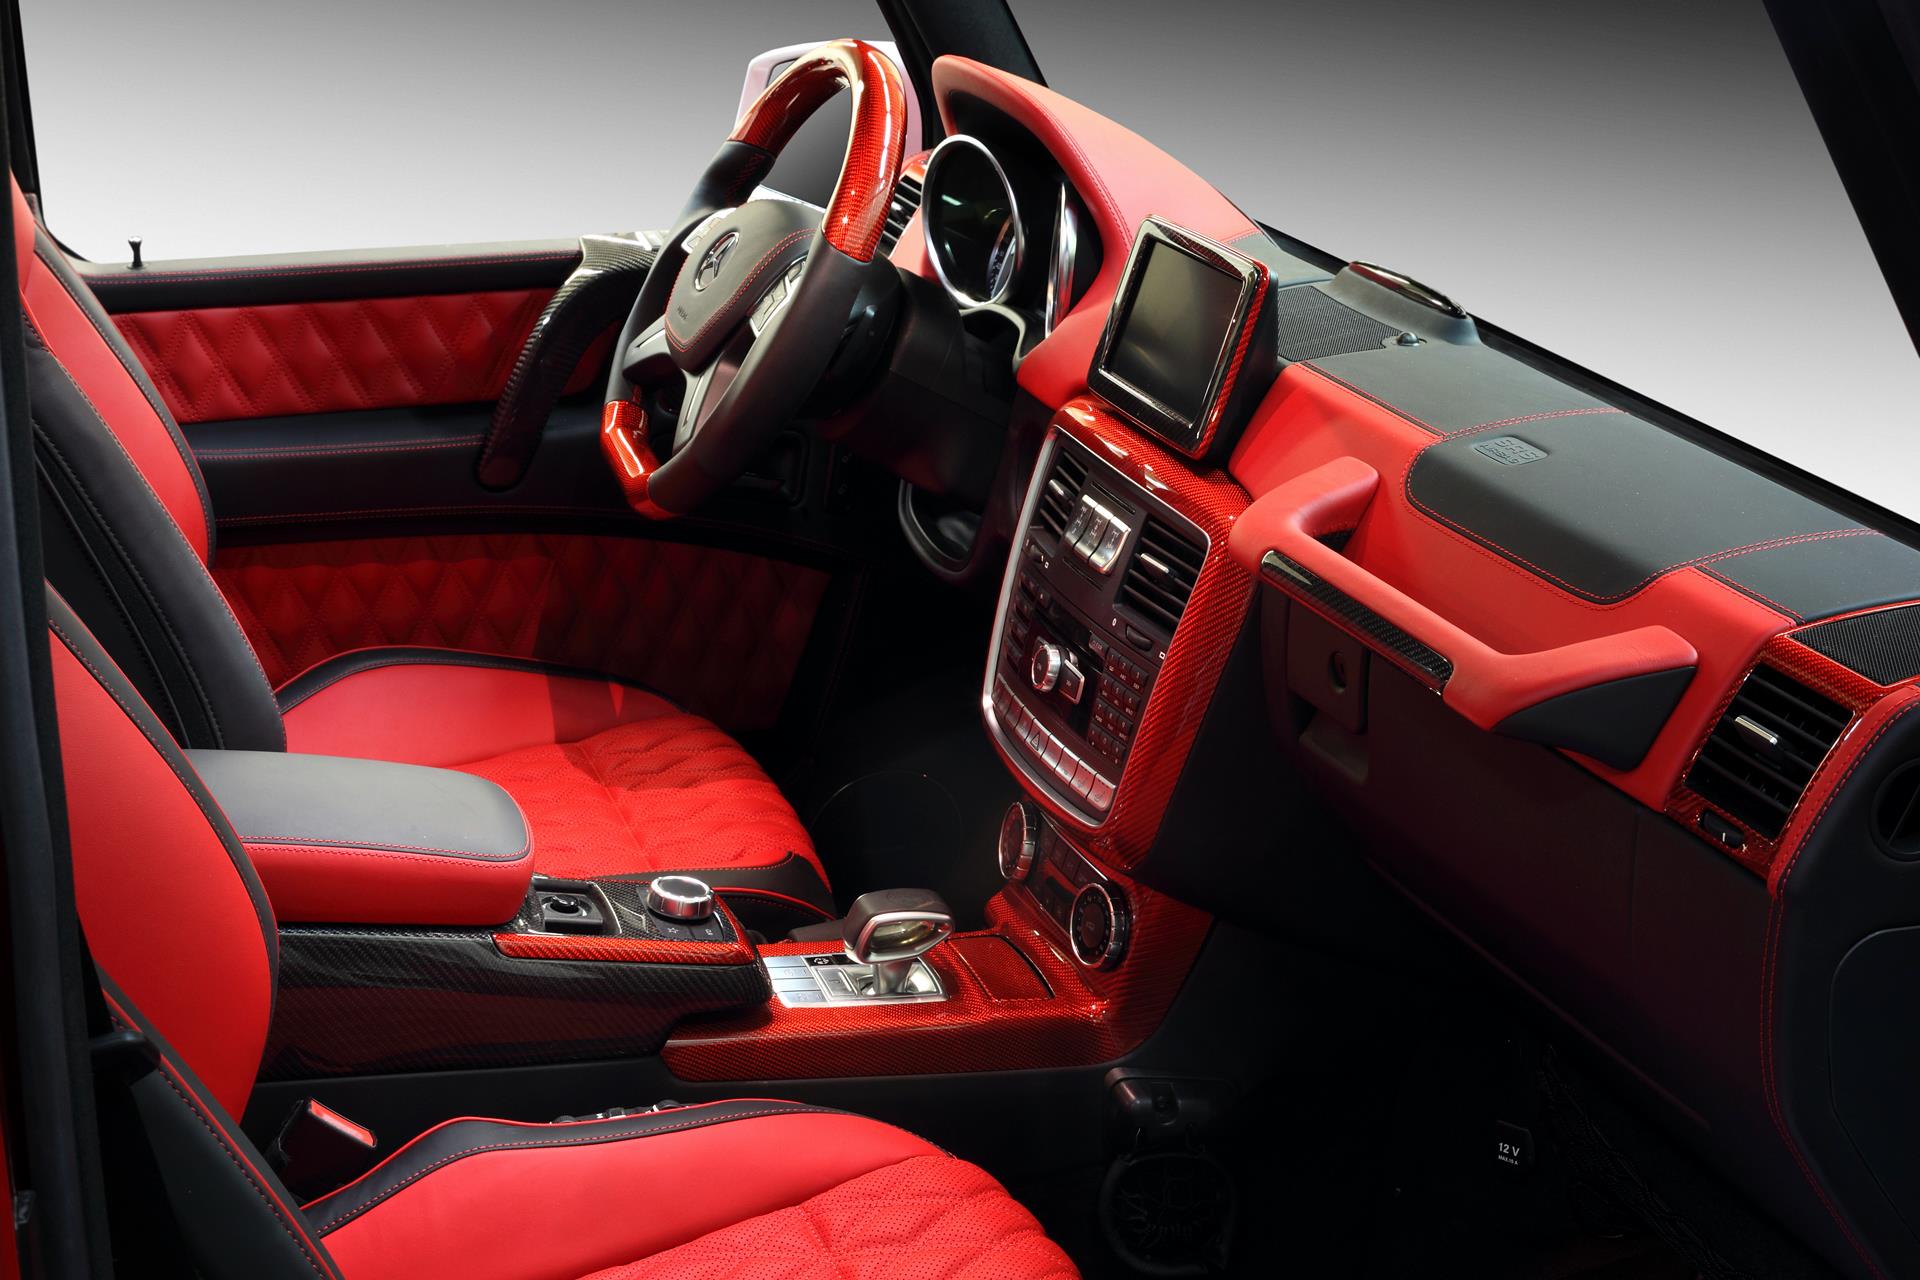 G63 Amg With Hamann Body Kit And Topcar Interior Is A Red